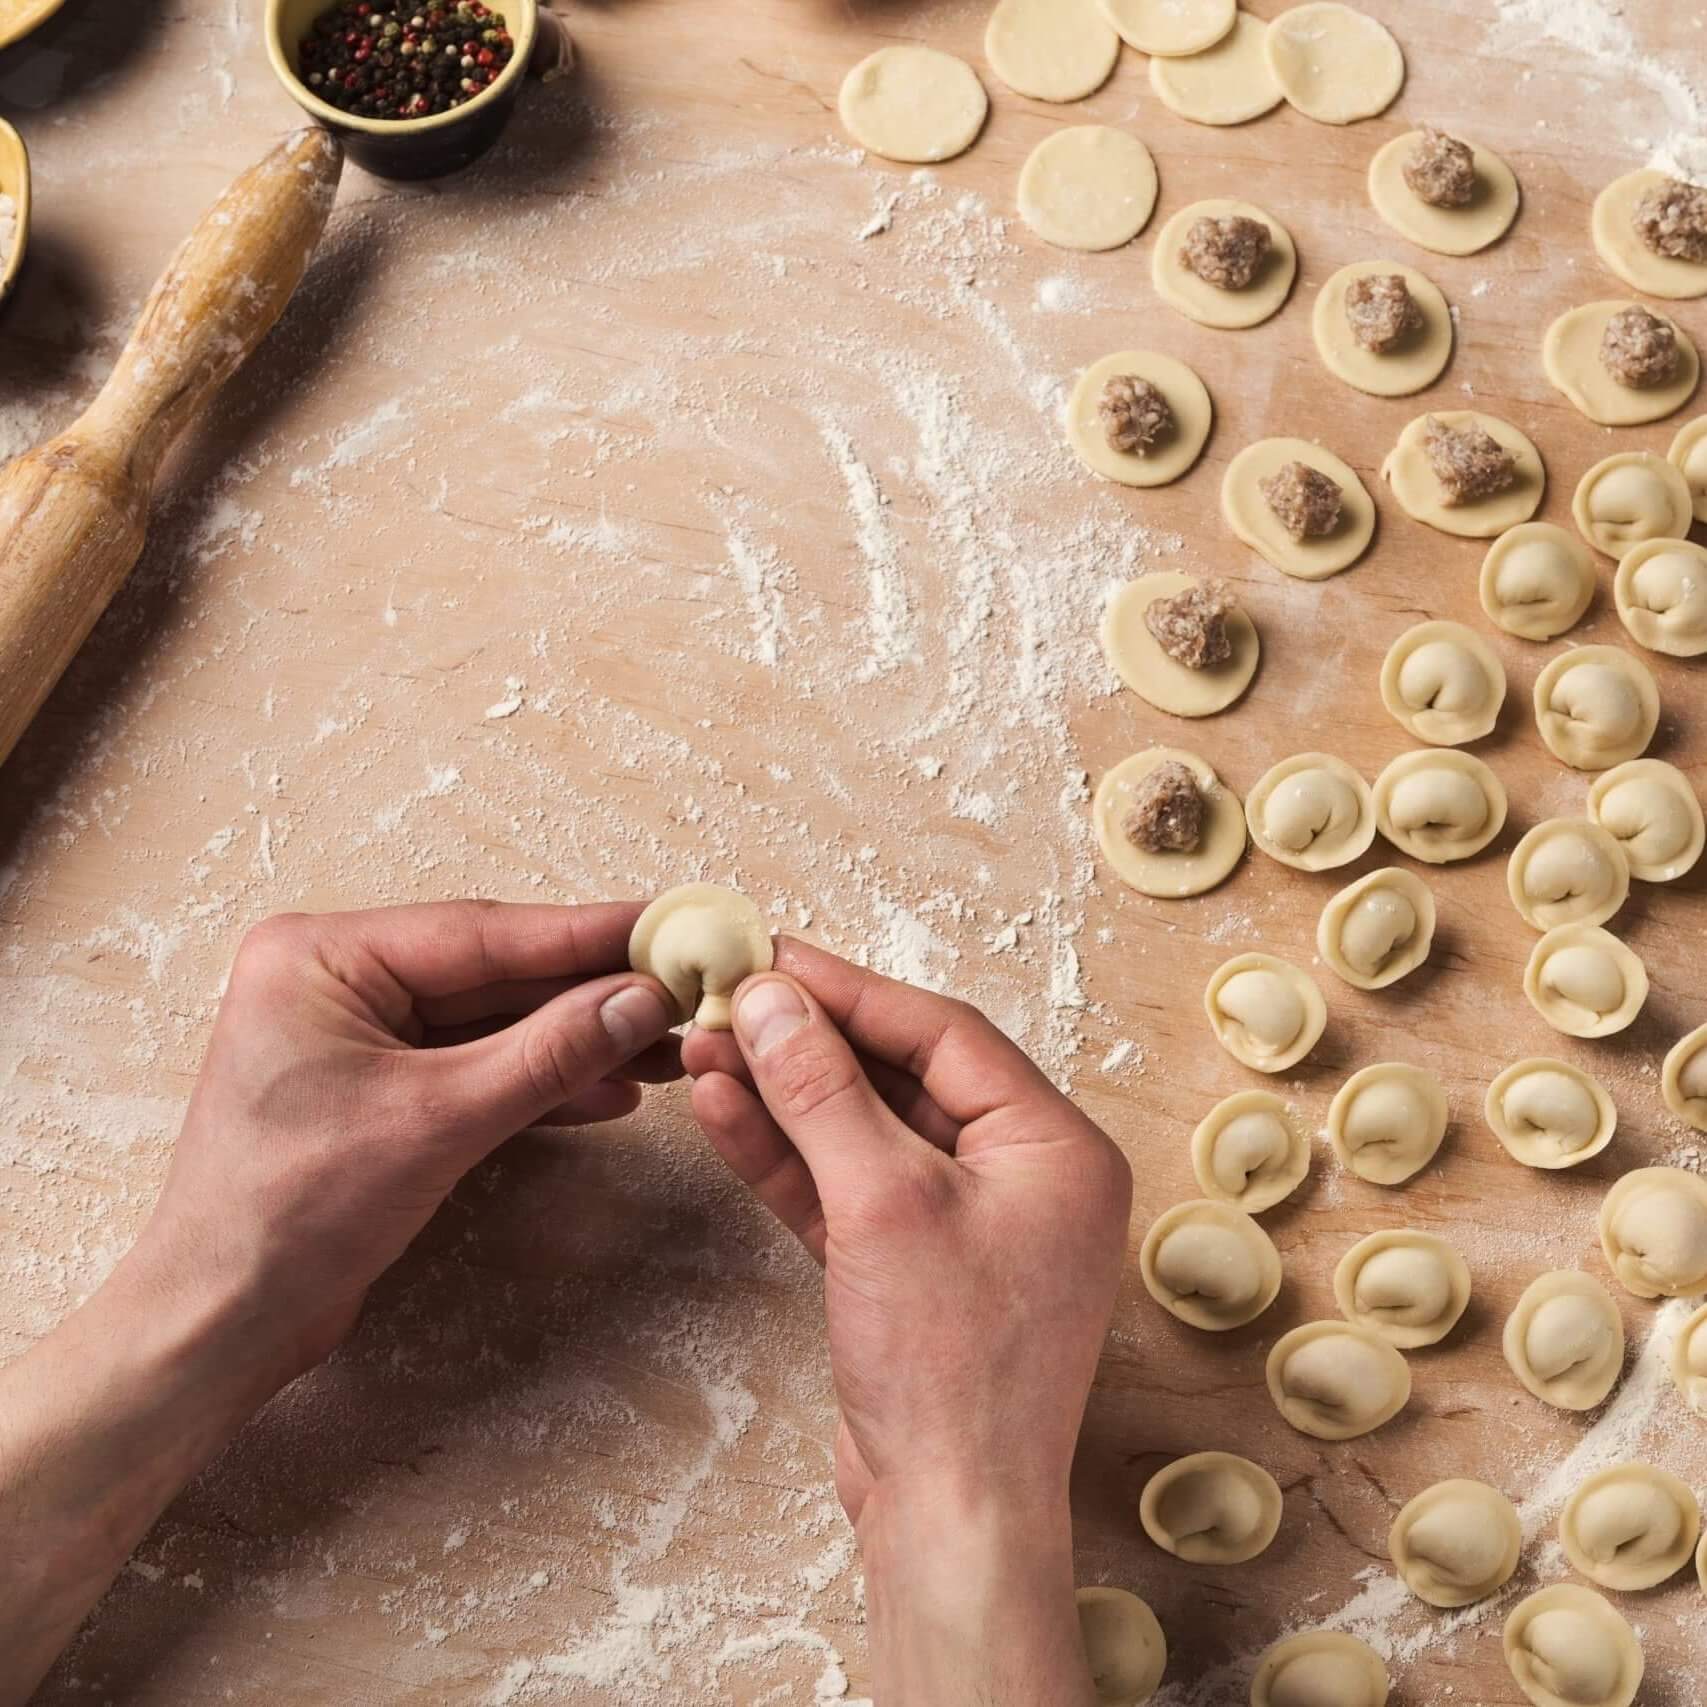 Chef hands forming small handmade dumplings on kitchen table, cooking ingredients, top view